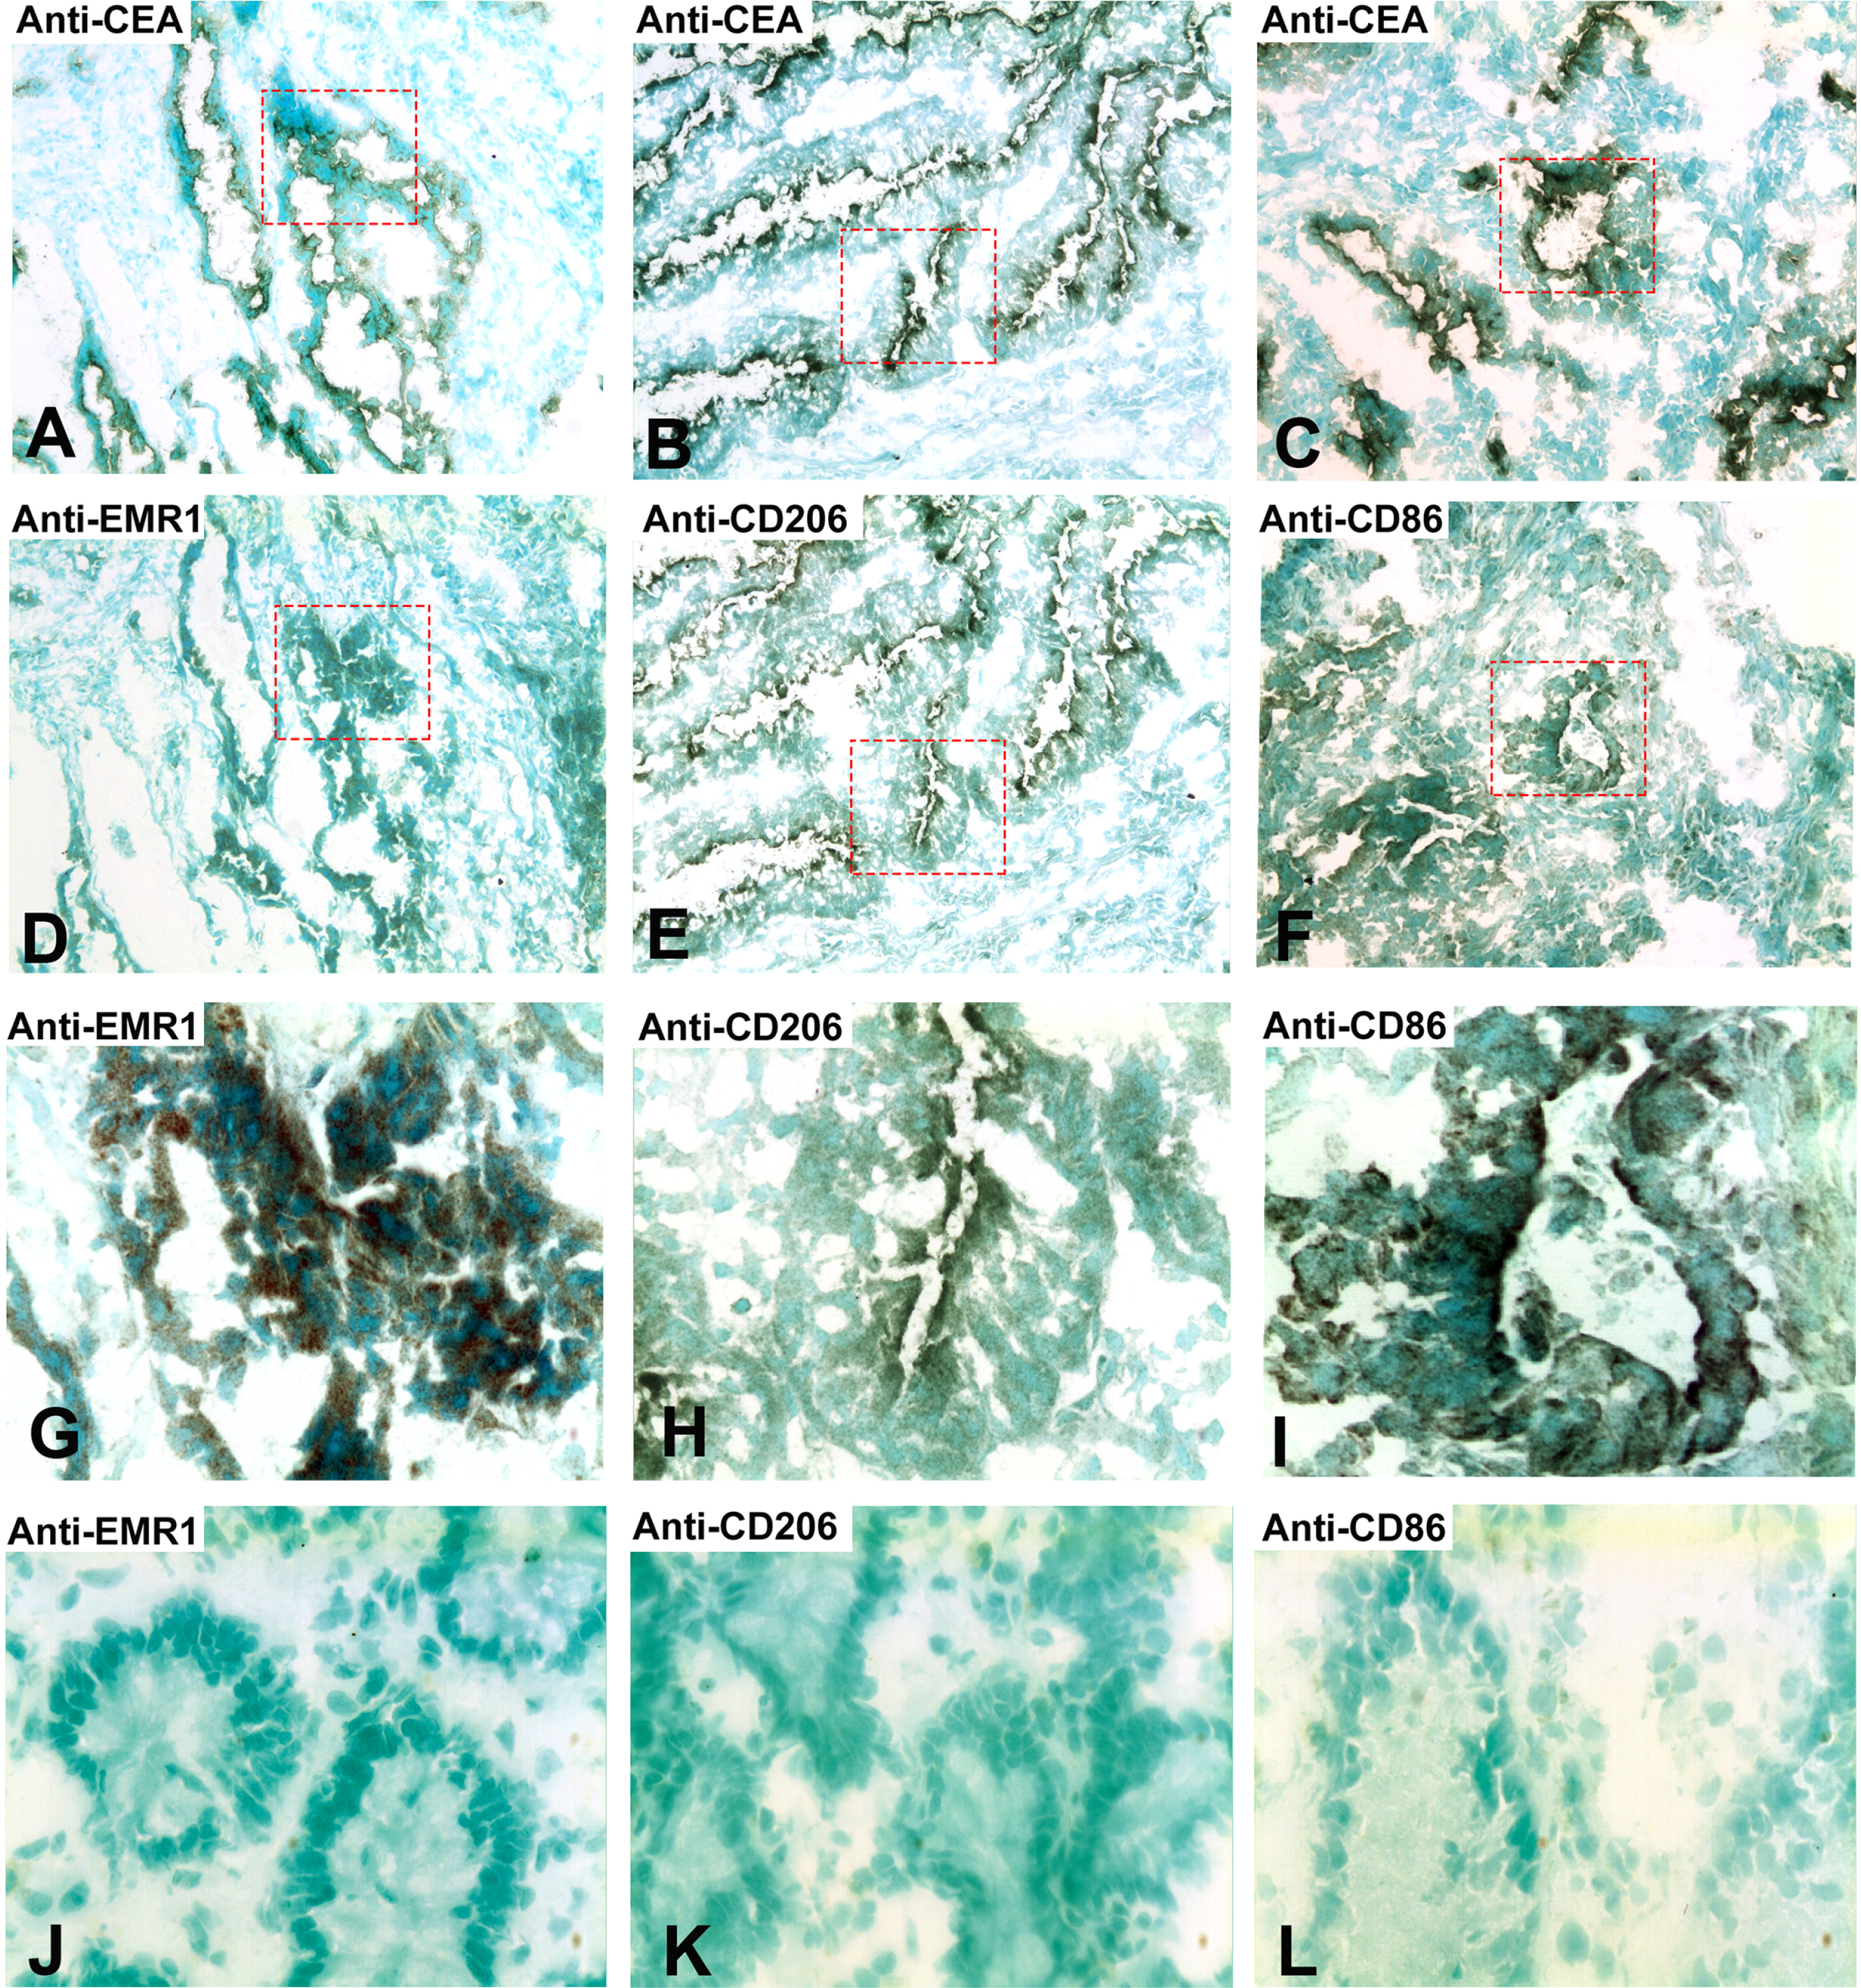 Immunoperoxidase staining of tissue sections of a primary CC tumor. (A), (B), (C) Anti-CEA staining, original magnification 100×. (D) Anti-EMR1 staining of a consecutive section of (A), original magnification 100×. (E) Anti-CD206 staining of a consecutive section of (B), original magnification 100×. (F) Anti-CD86 staining of a consecutive section of (C), original magnification 100×. (G) Higher magnification of indicated area in (D), 400×. (H) Higher magnification of indicated area in (E), 400×. (I) Higher magnification of indicated area in (F), 400×. (J) Anti-EMR1 staining of normal colon tissue, 400x. (K) Anti-CD206 staining of normal colon tissue, 400x. (L) Anti-CD86 staining of normal colon tissue, 400x. Positive cells stained brown to black. Methyl-green was used for counterstaining.